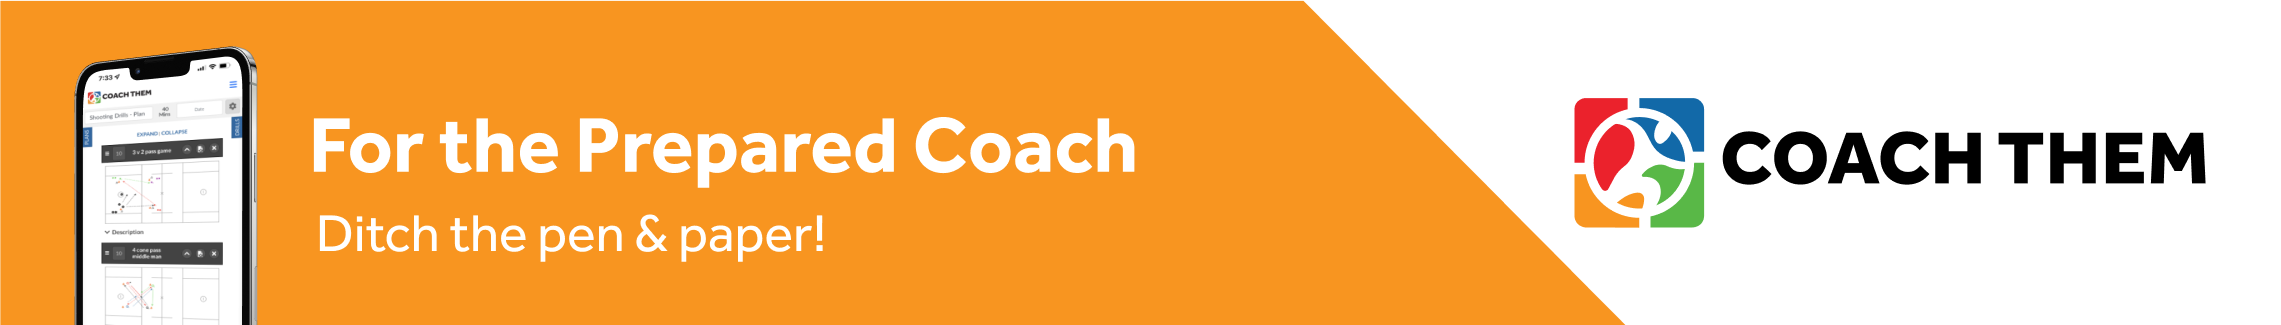 For the Prepared Coach - CoachThem